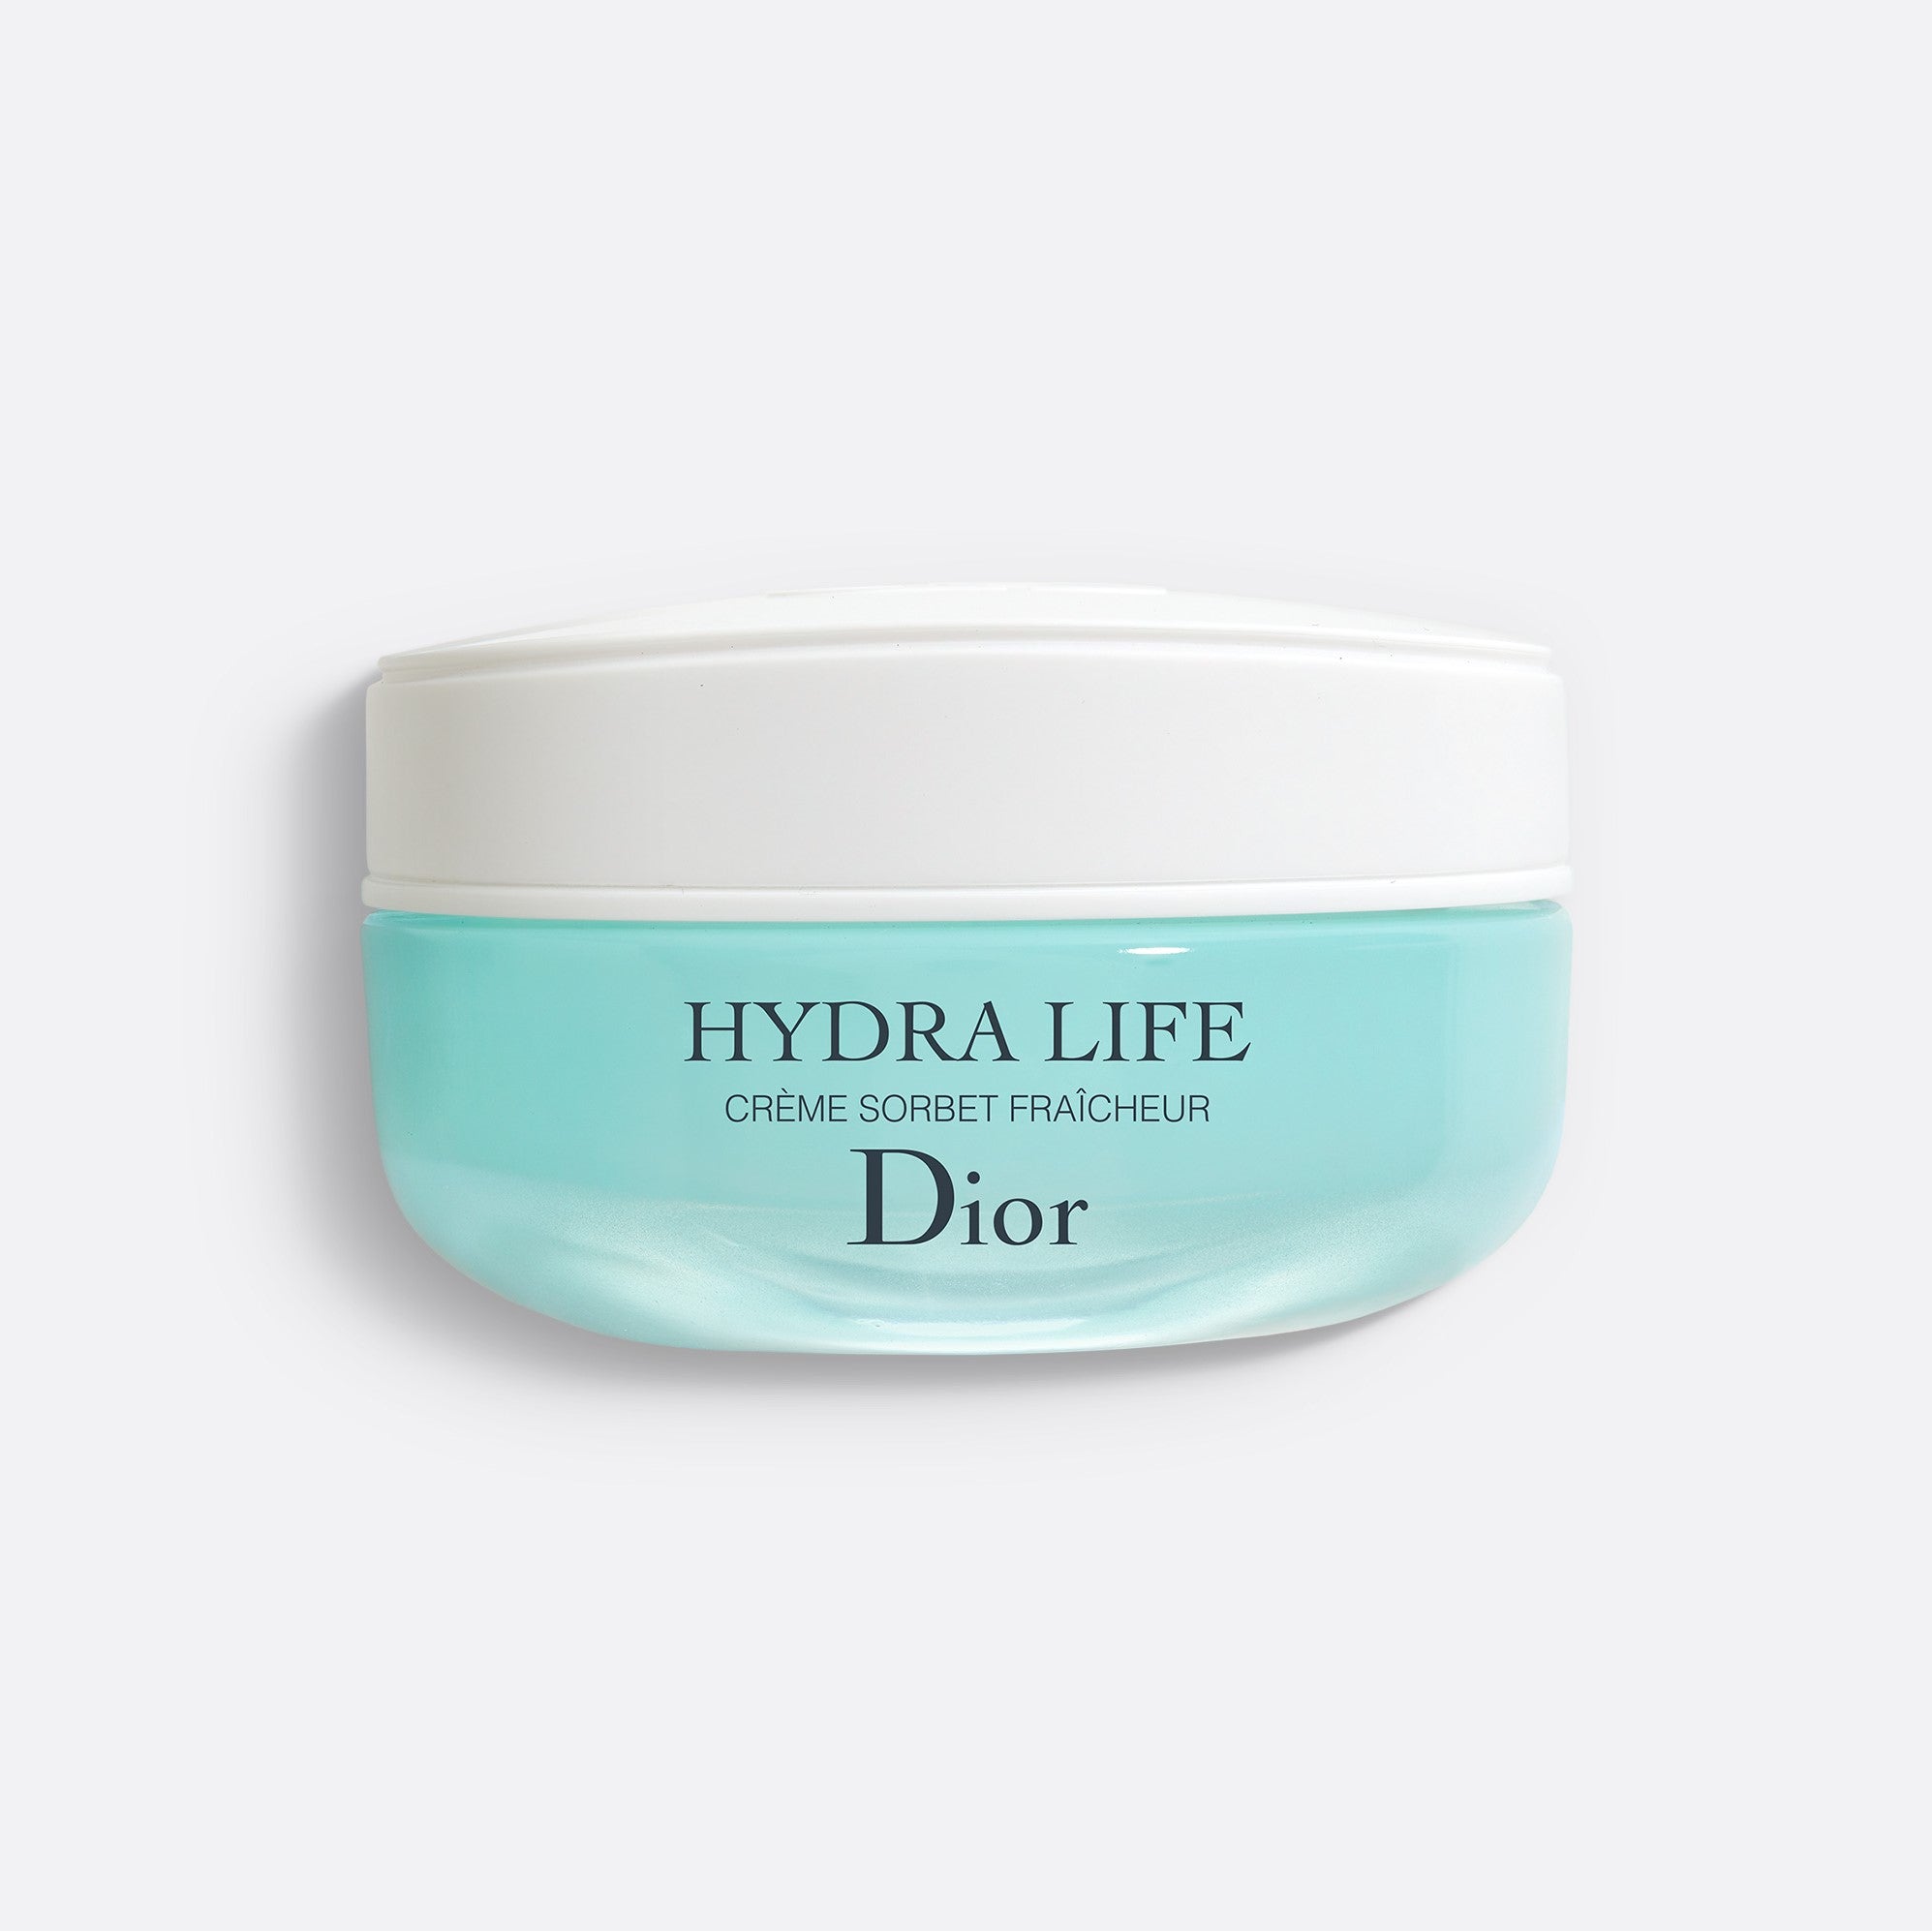 DIOR HYDRA LIFE FRESH SORBET CREME | Hydrating face and neck cream - hydrates, plumps and enhances